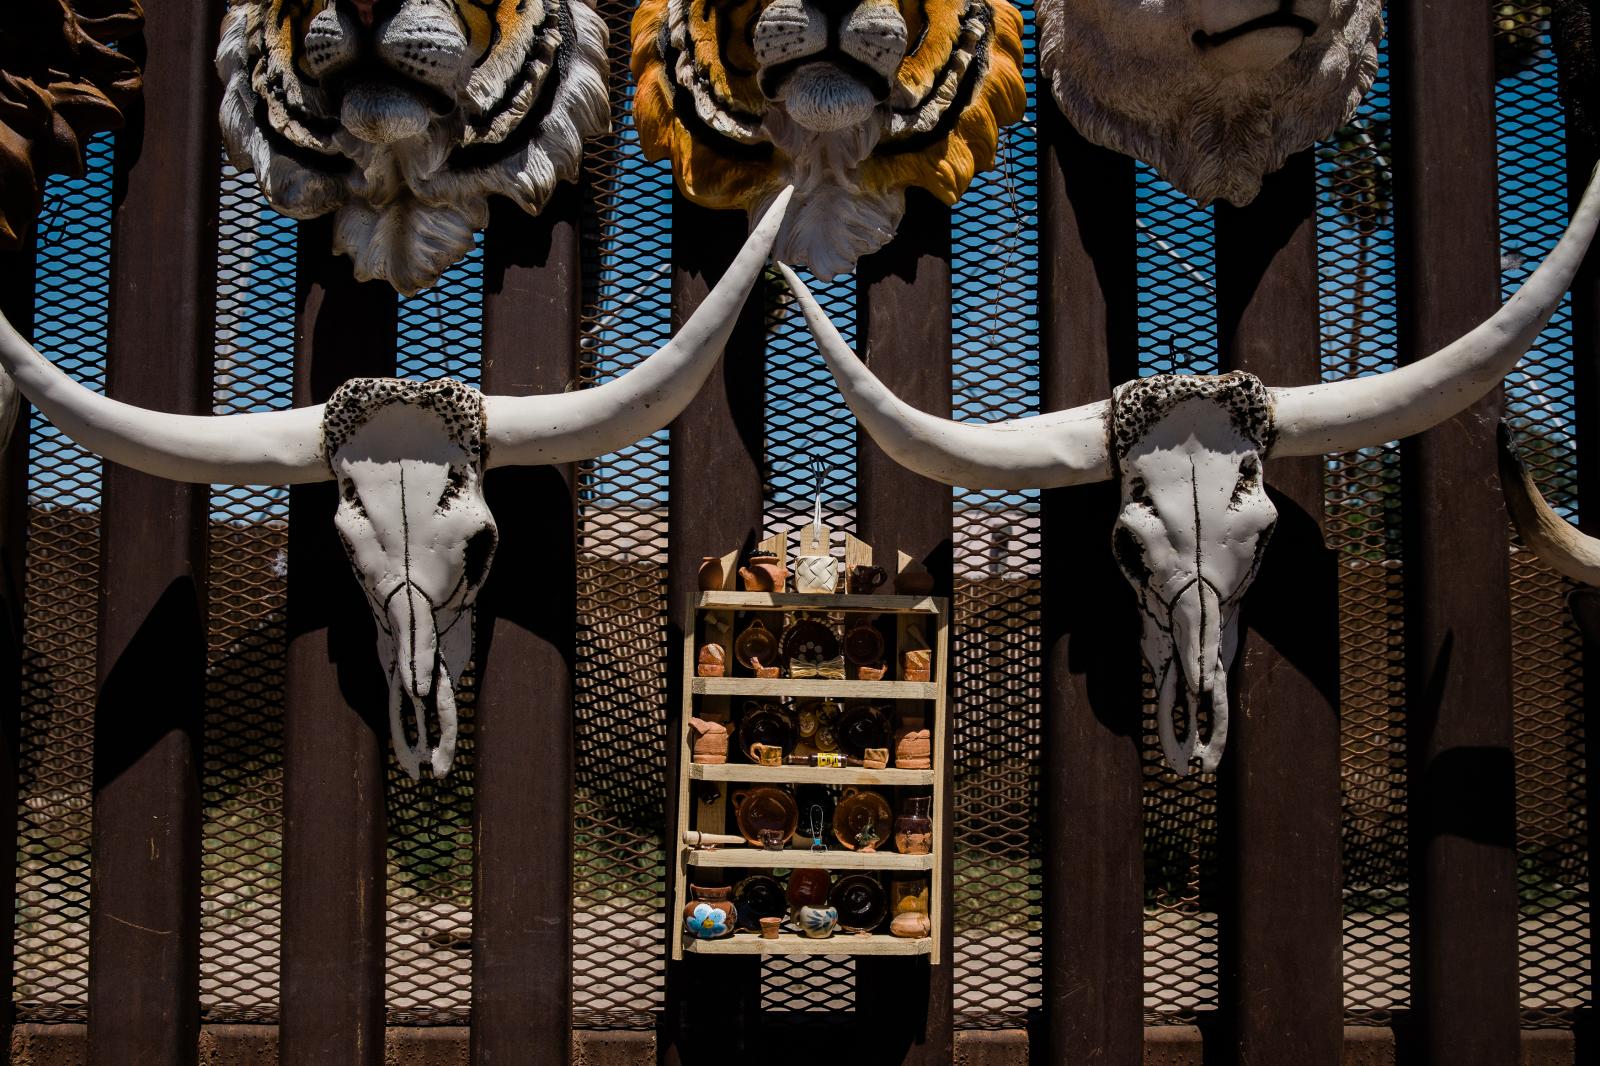 Image from Mexico - Souvenirs are displayed on the border fence the divides...